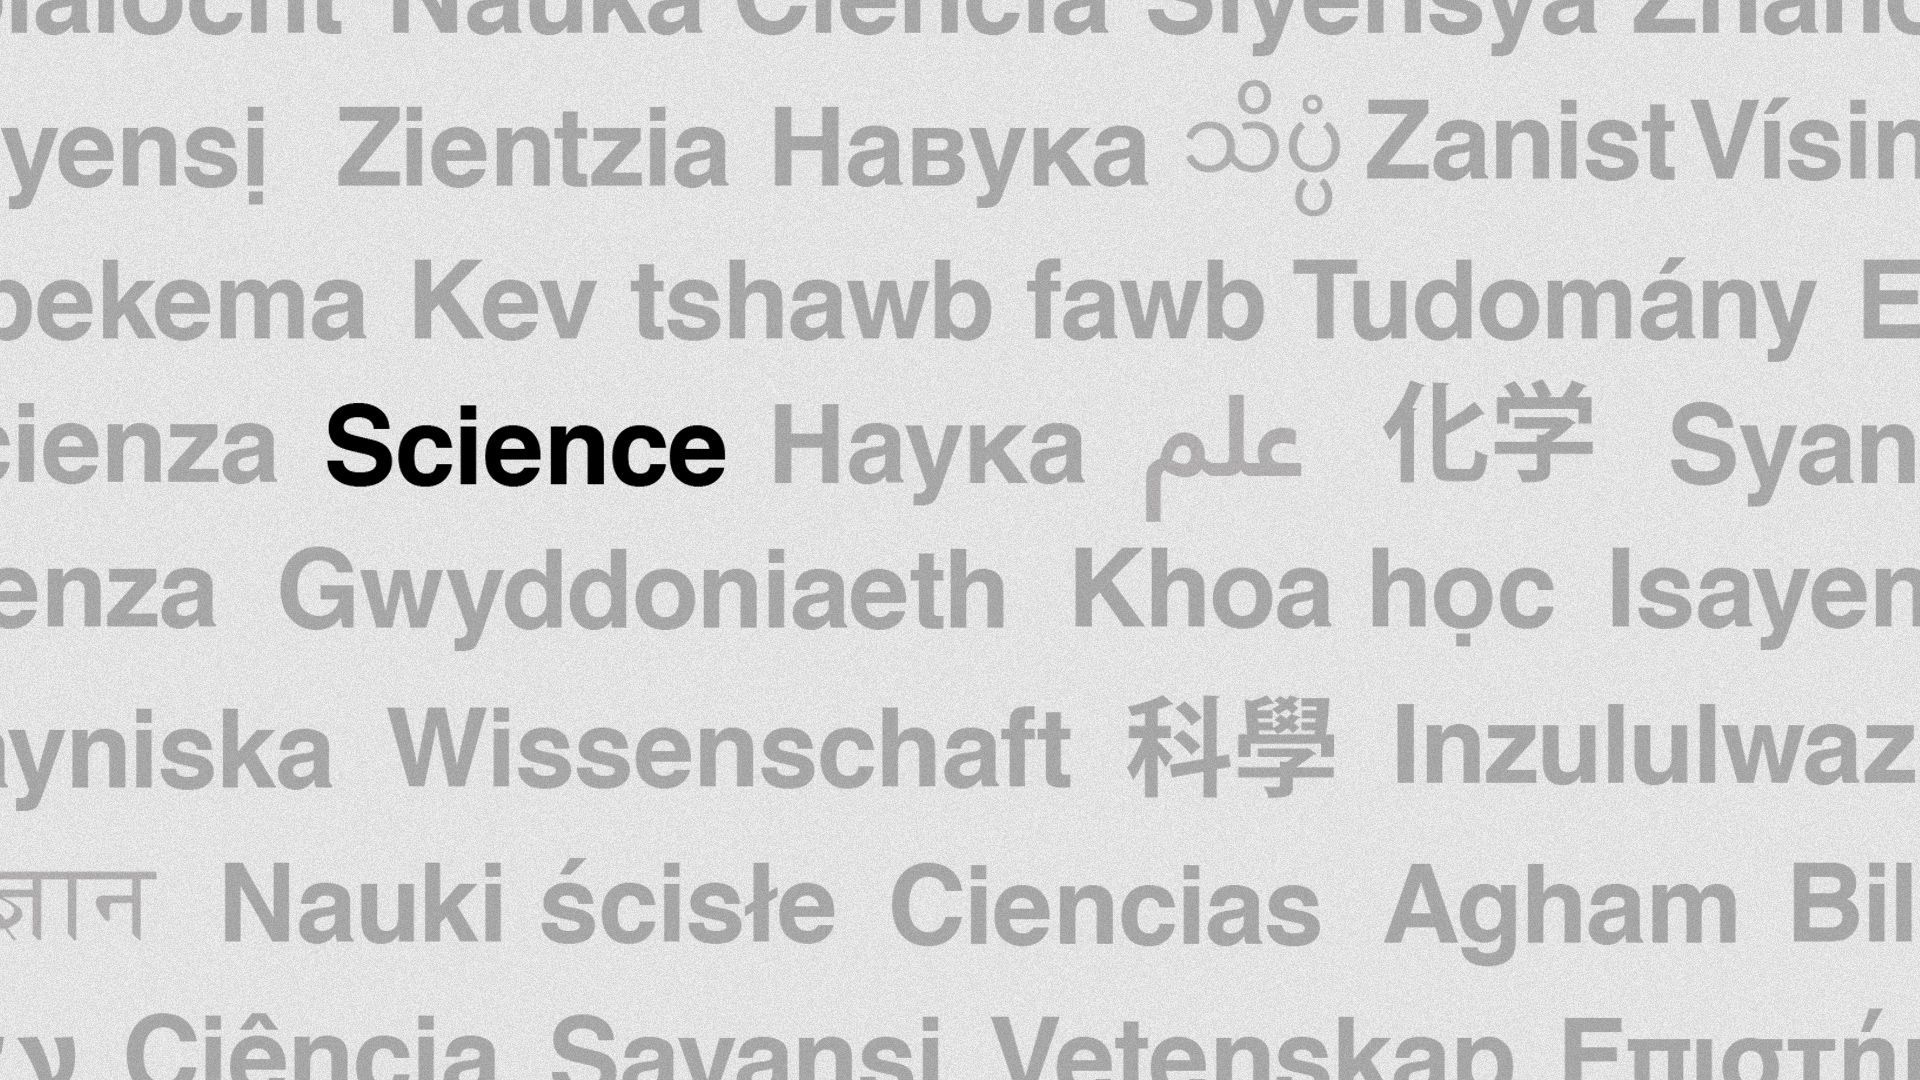 Illustration of the word "Science" in various languages with "Science" in English featured more prominently. 